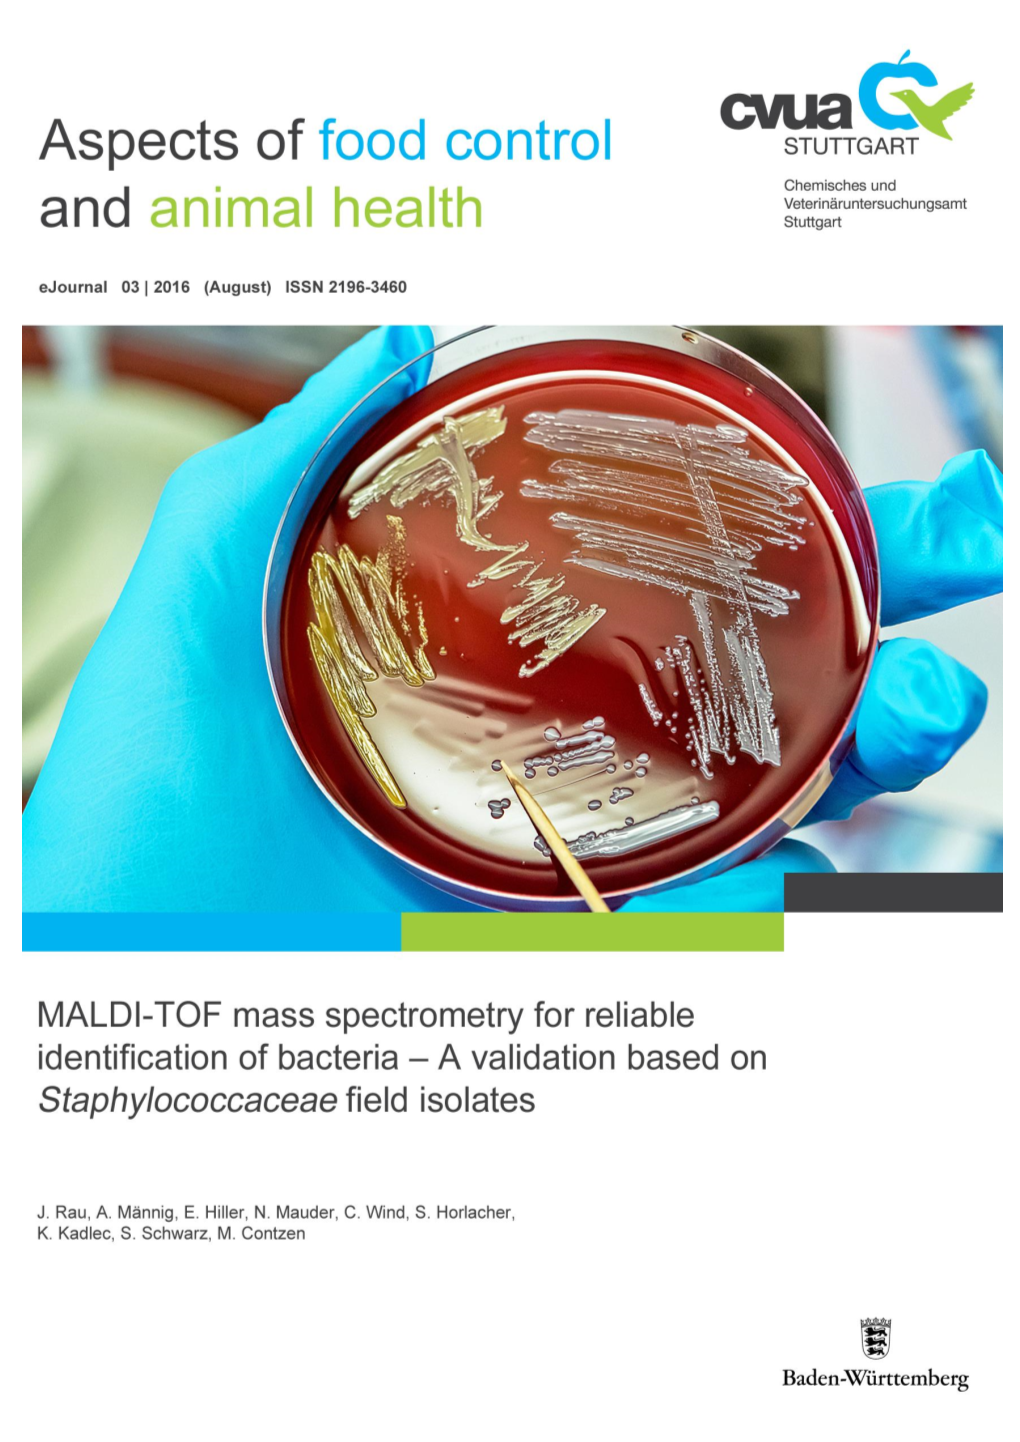 MALDI-TOF Mass Spectrometry for Reliable Identification of Bacteria – a Validation Based on Staphylococcaceae Field Isolates